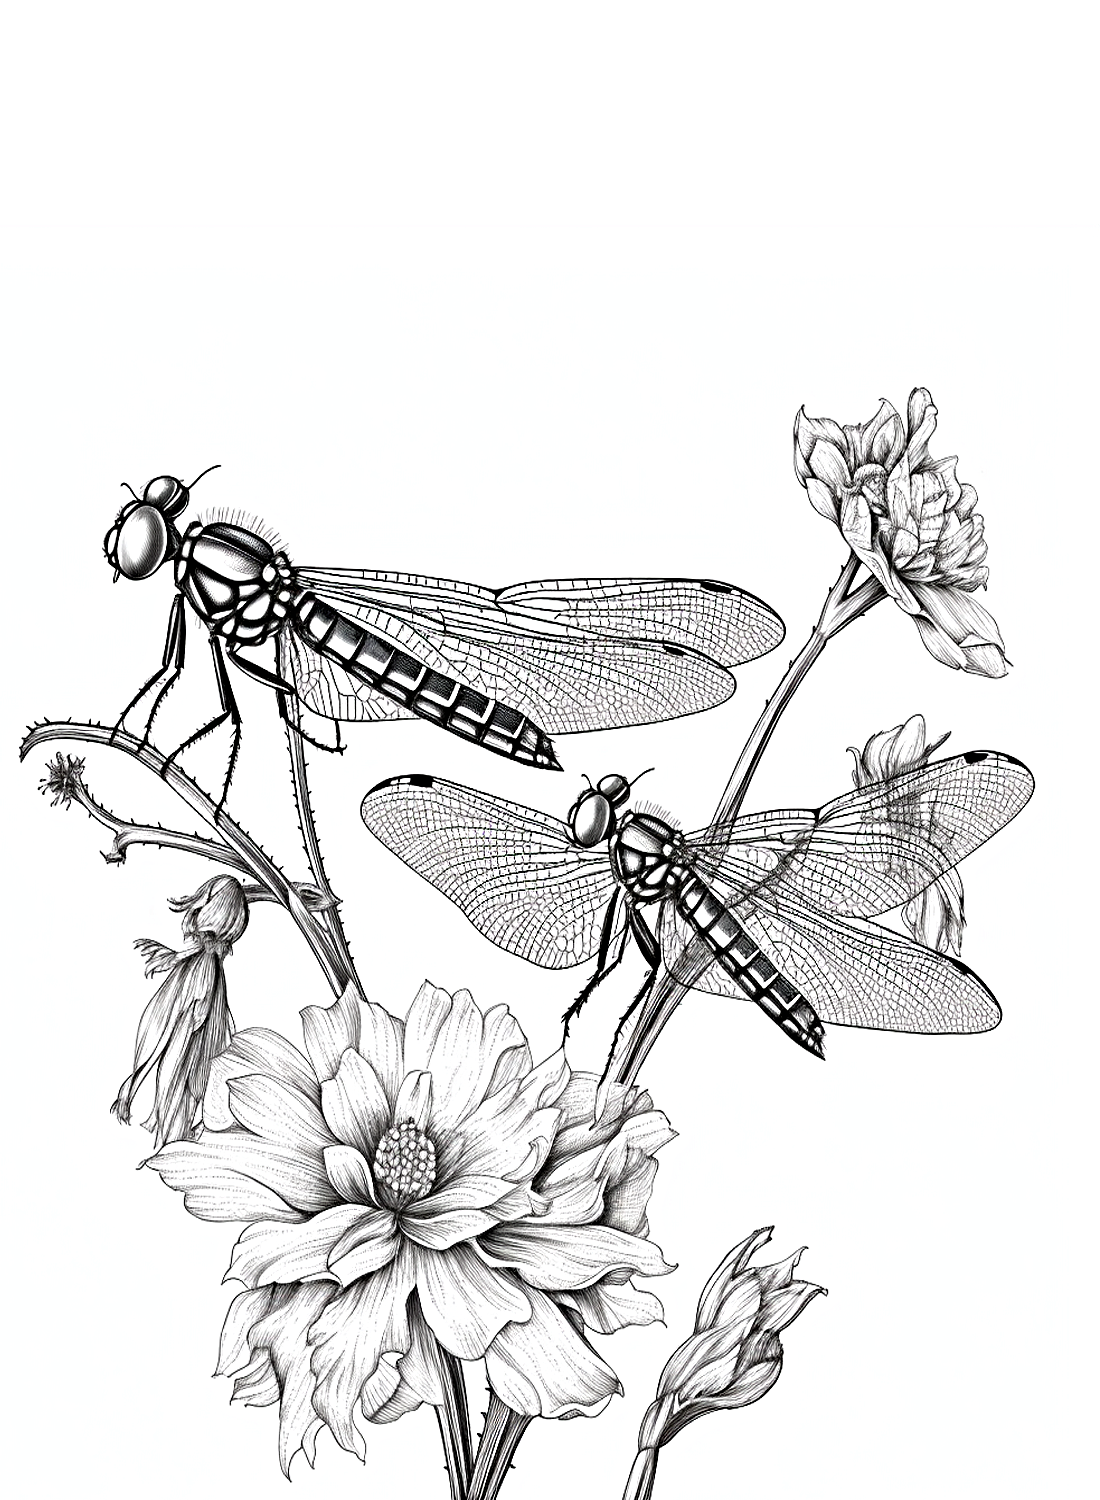 The Damselfly and the daisy from Damselfly